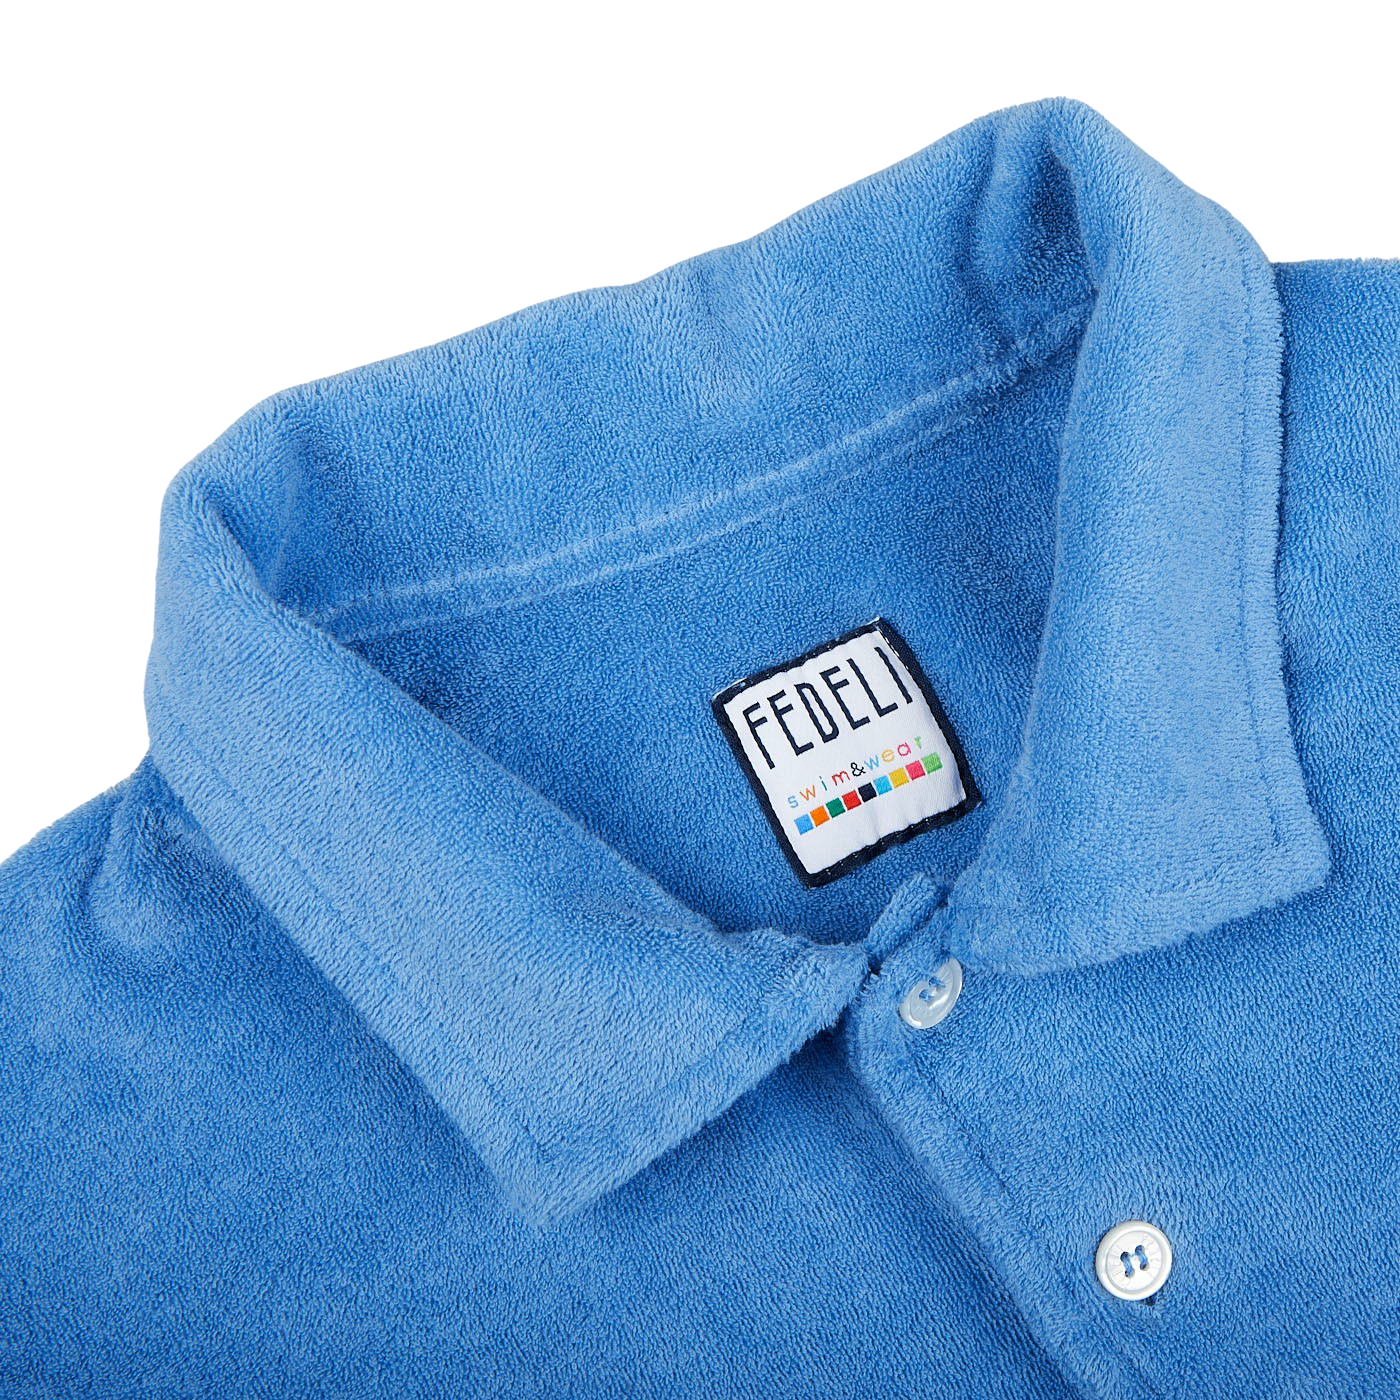 A summer favorite Fedeli Bright Blue Cotton Towelling Polo Shirt with a label on the collar.